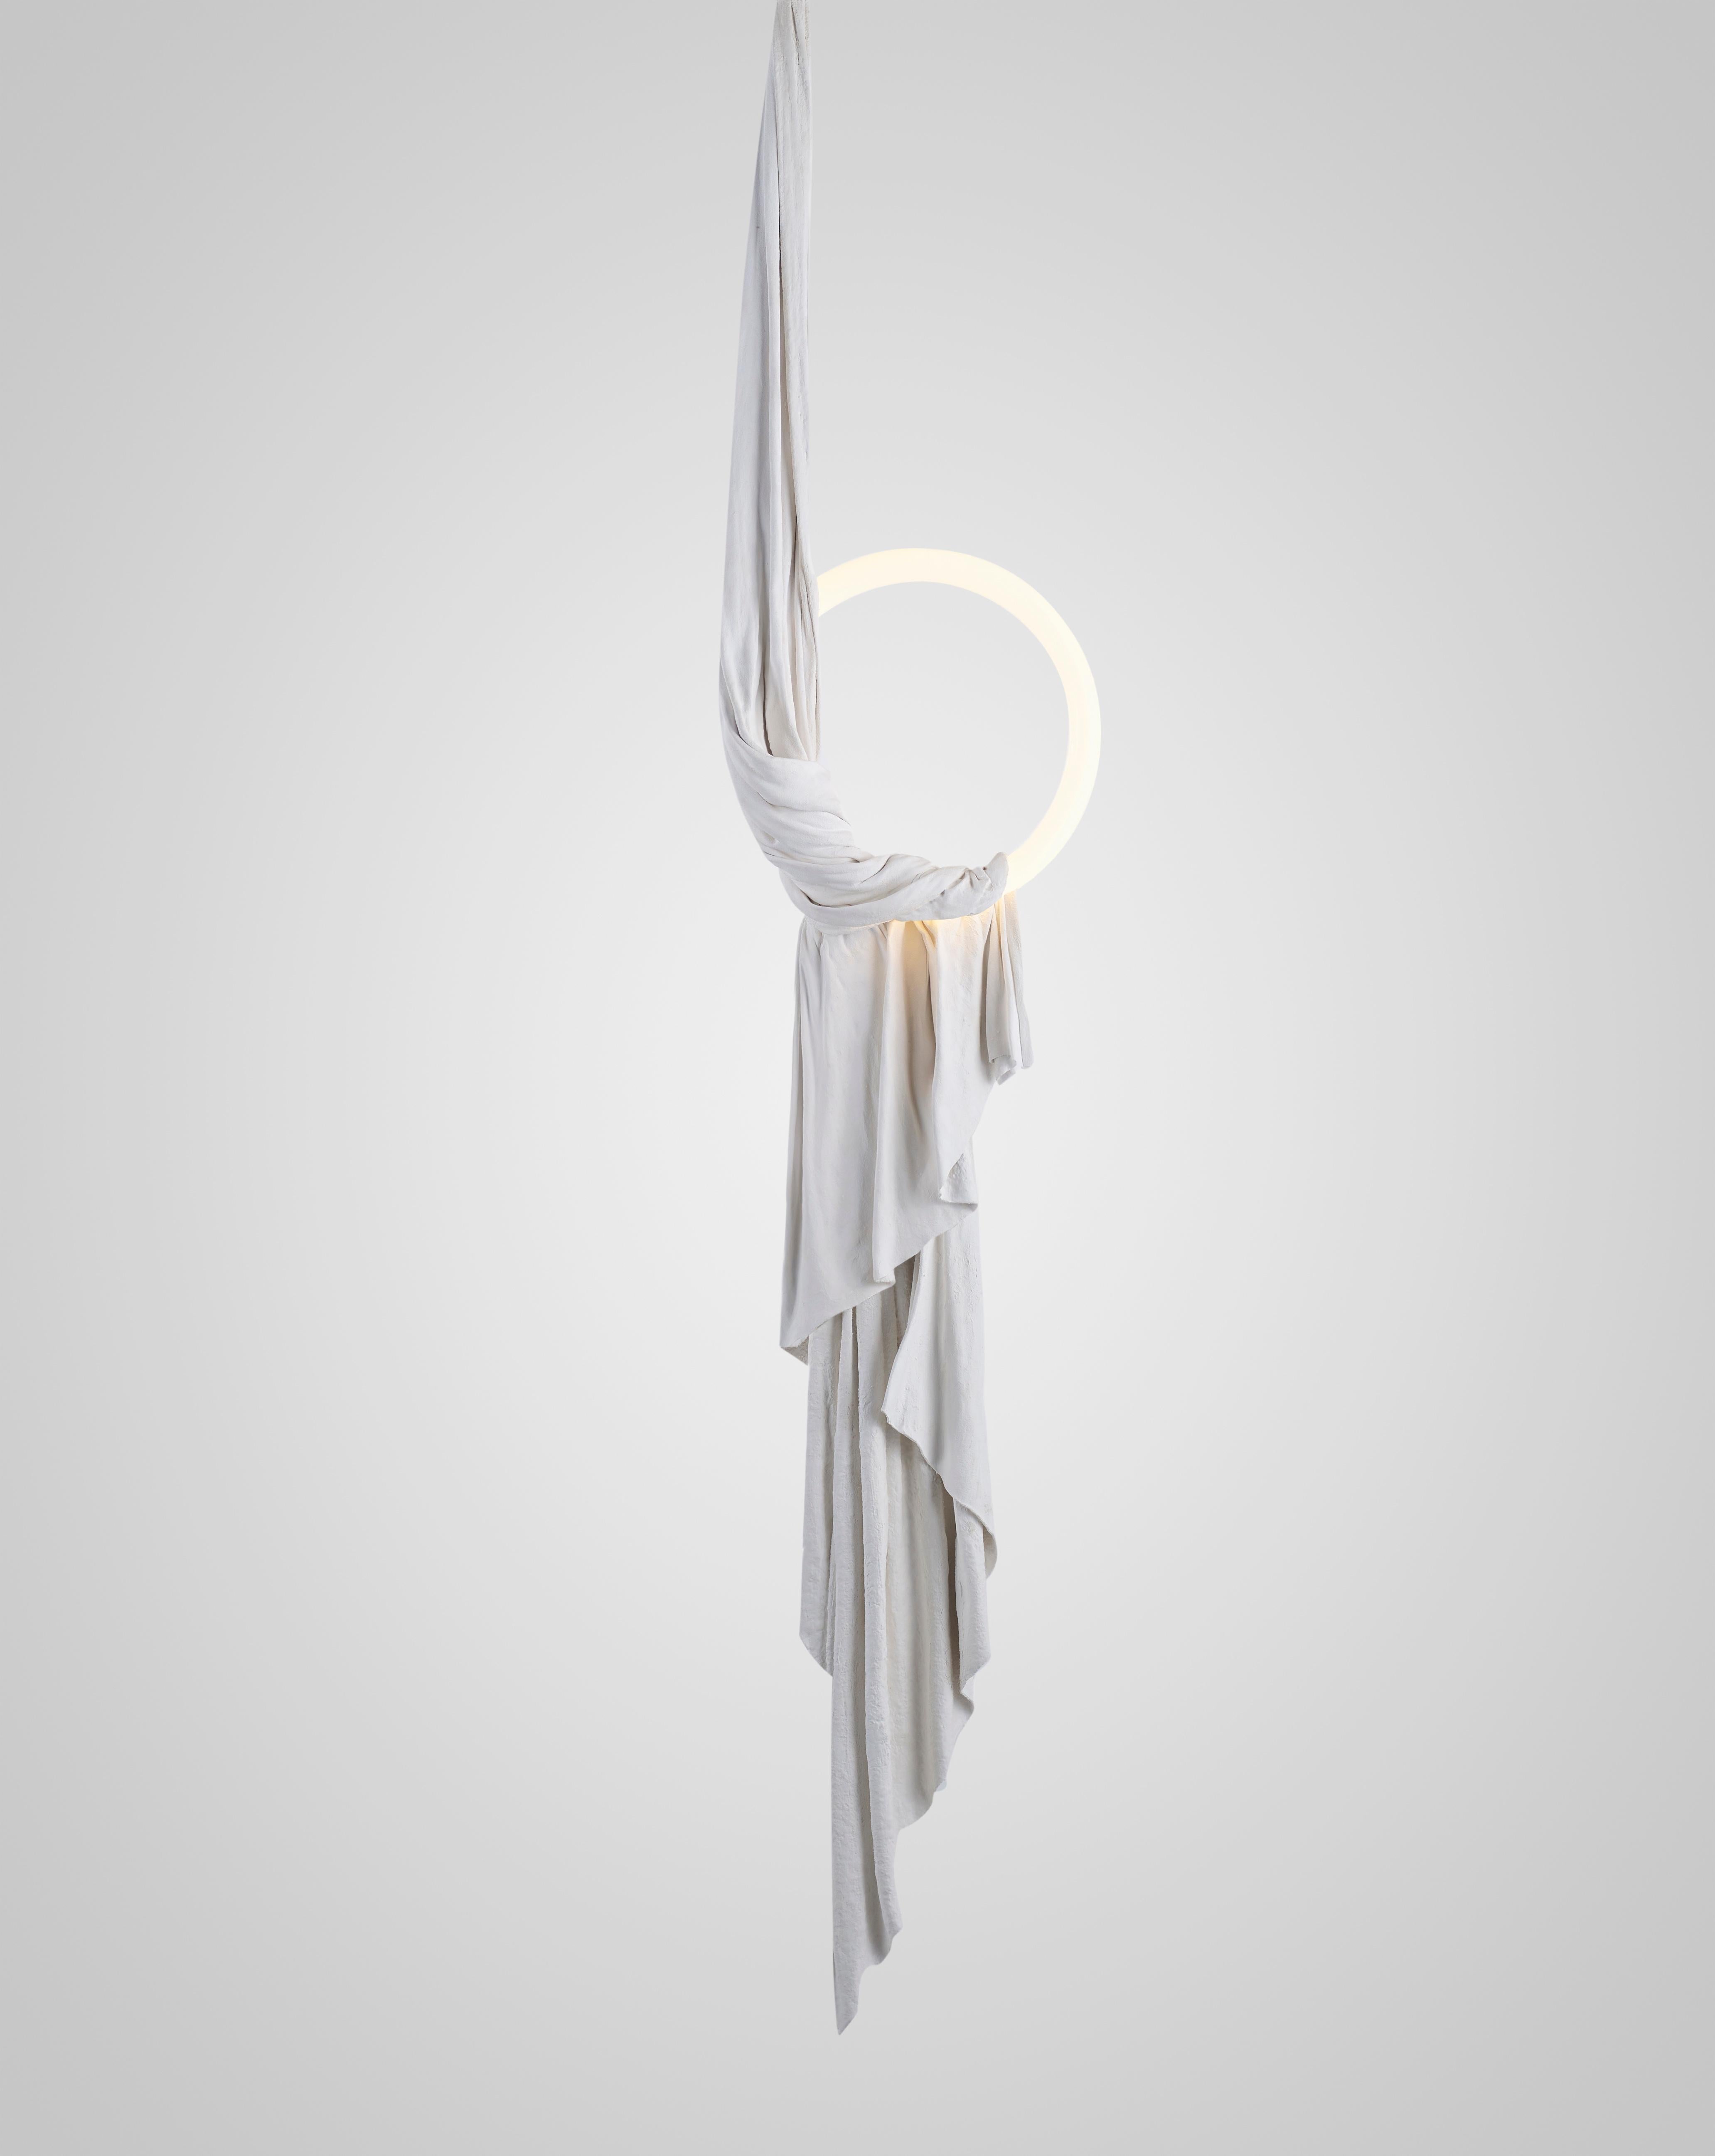 Lee Broom - REQUIEM RING In New Condition For Sale In New York, US